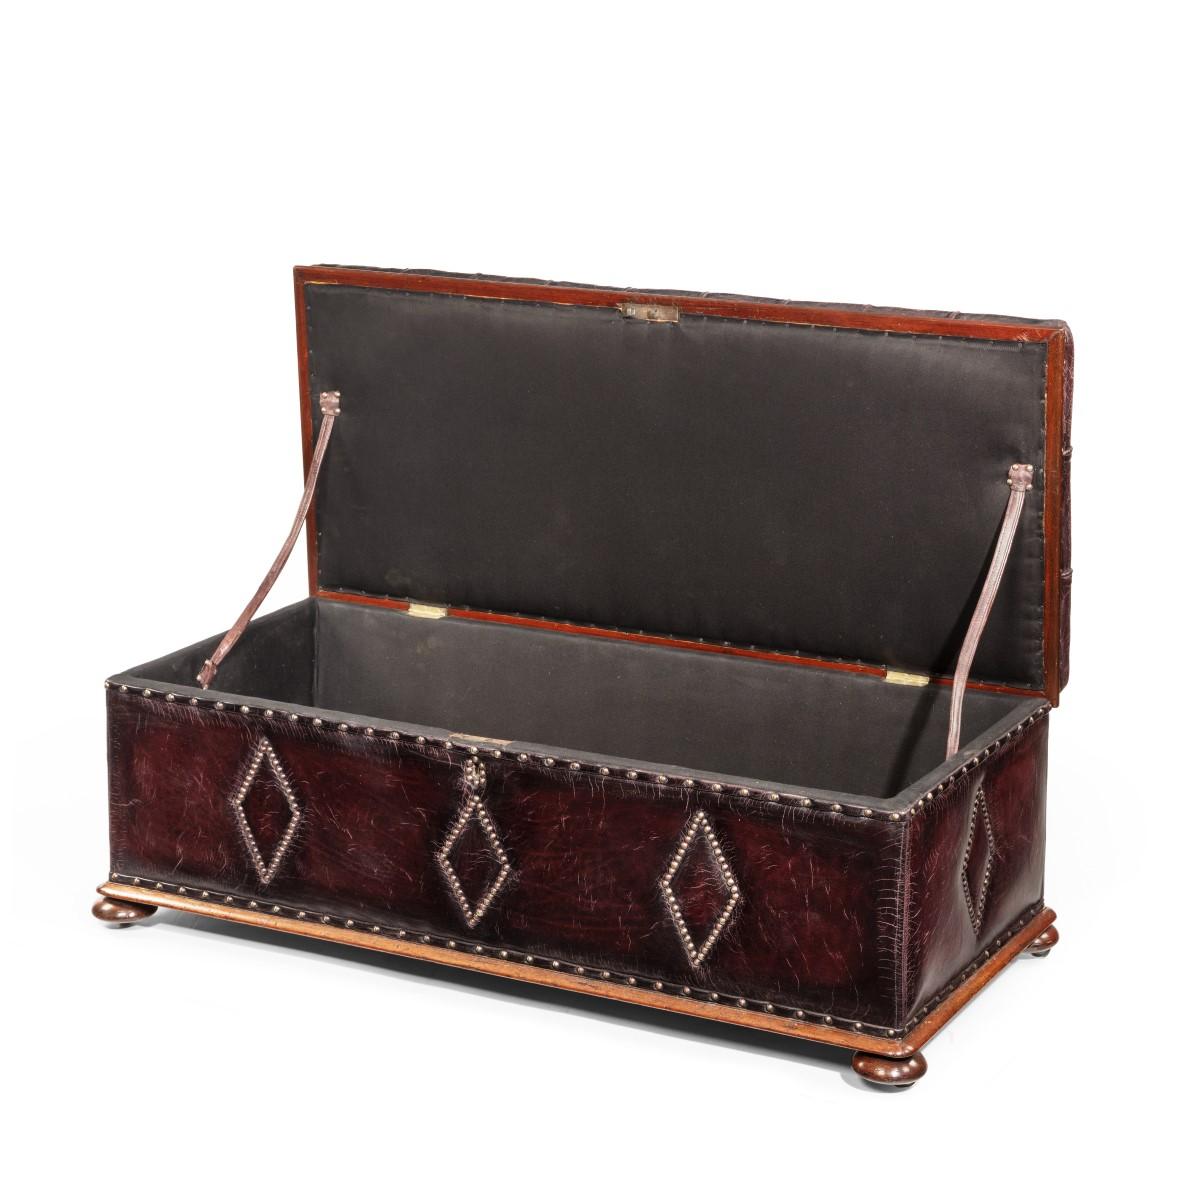 A mahogany box ottoman, of long rectangular form with a hinged lid and tapering sides, re-upholstered in burgundy leather, the top deep-buttoned and the sides with close-nailed brass lozenges, set on bun feet. English, circa 1860.

  